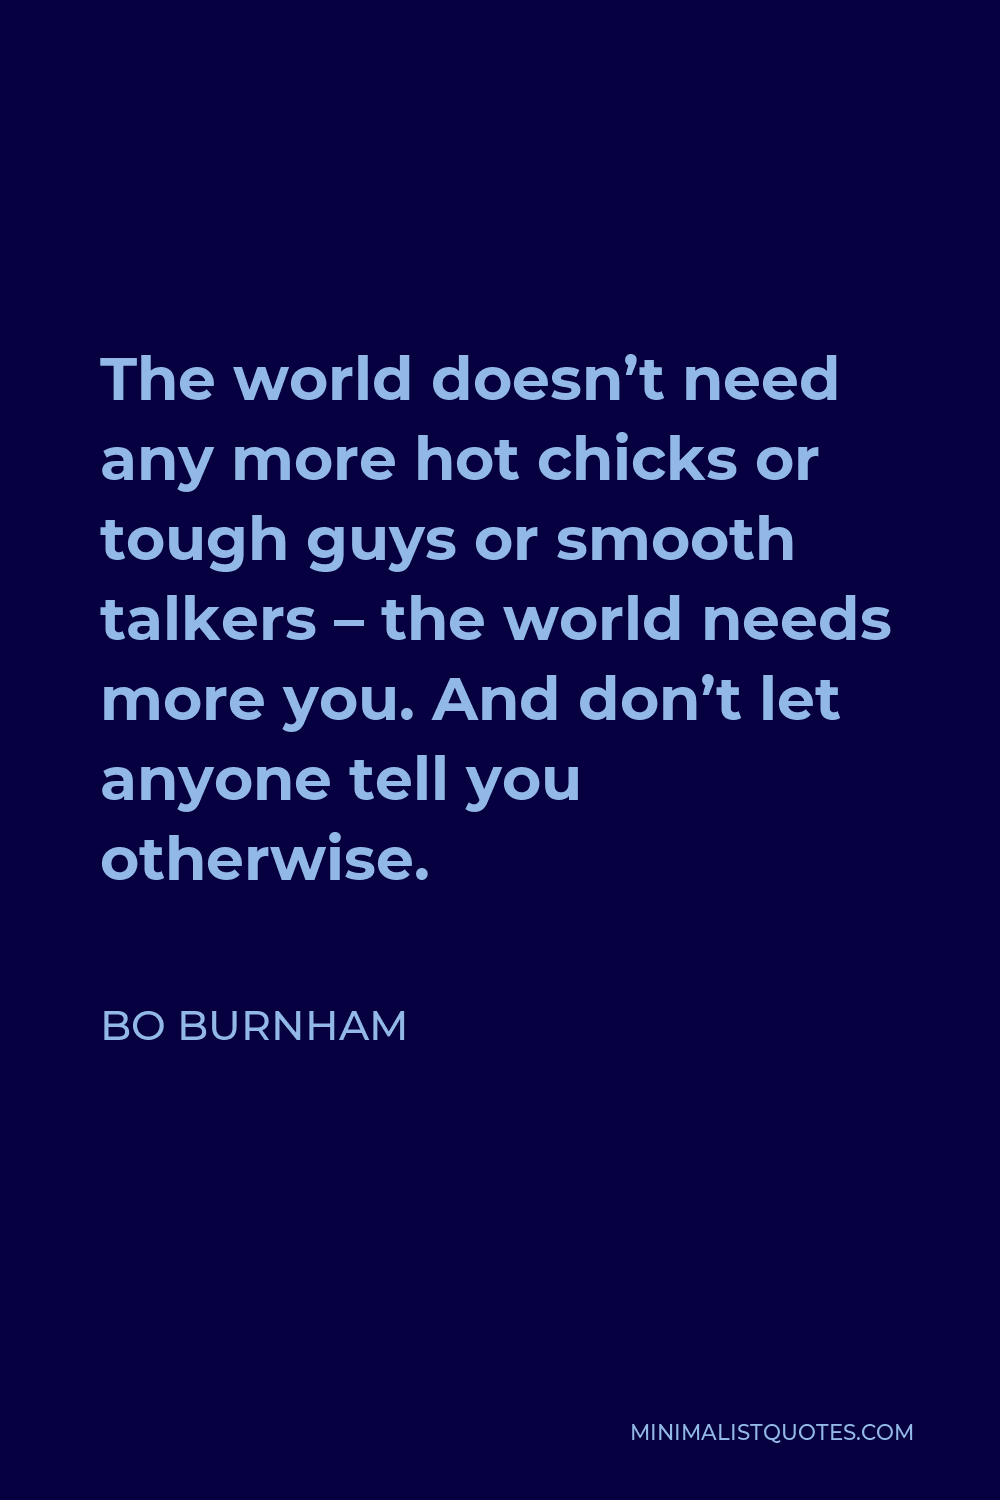 Bo Burnham Quote - The world doesn’t need any more hot chicks or tough guys or smooth talkers – the world needs more you. And don’t let anyone tell you otherwise.